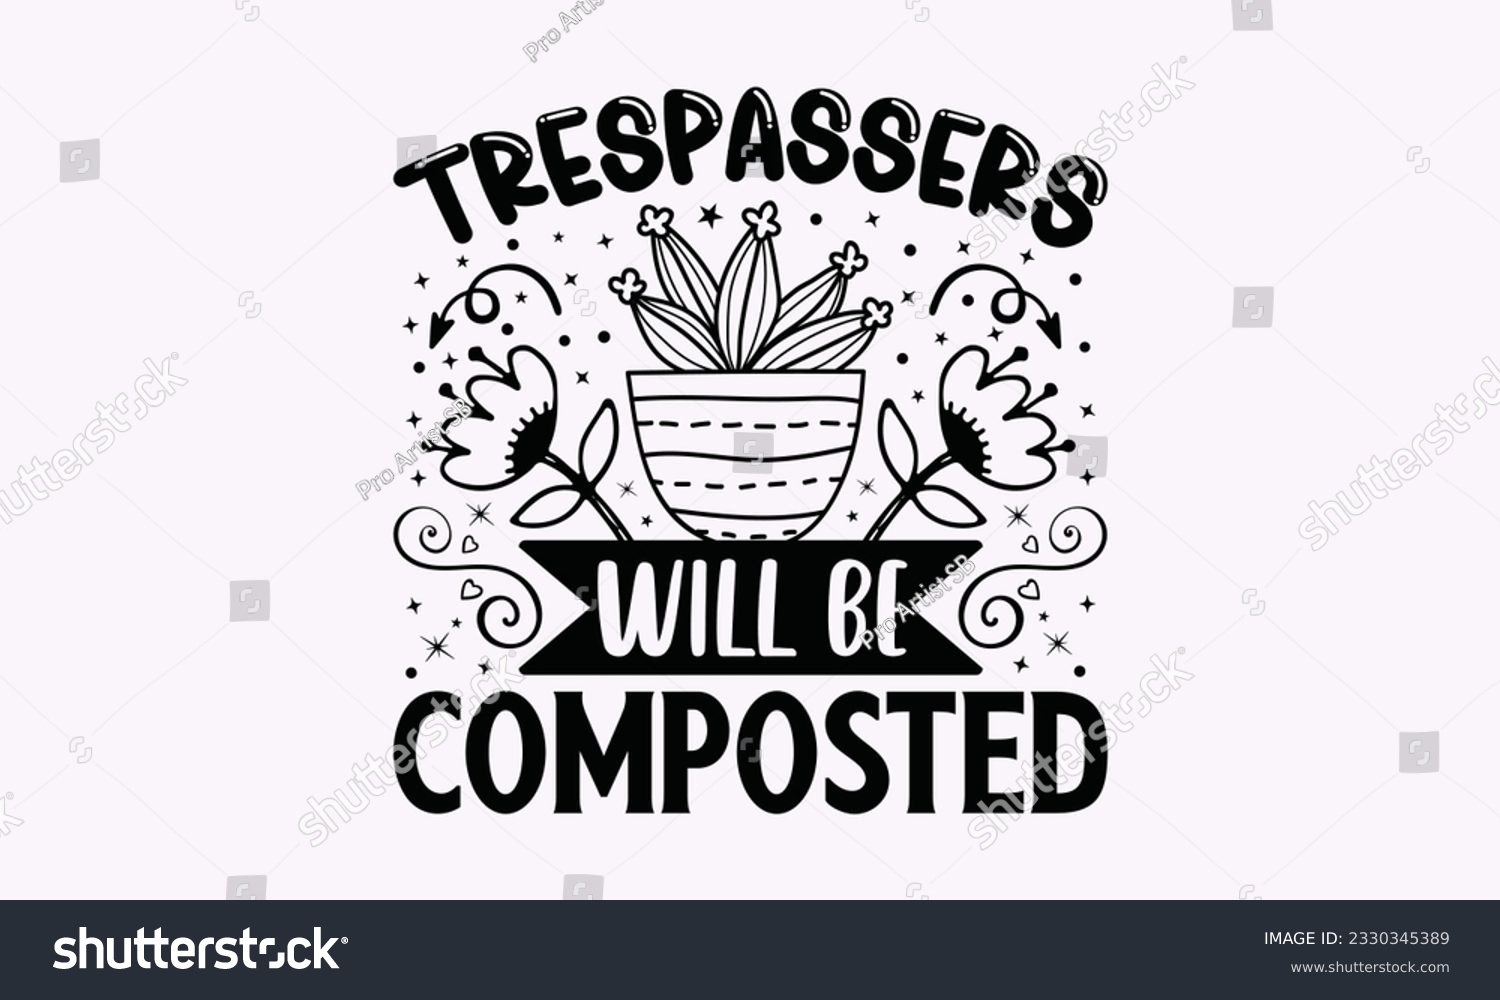 SVG of Trespassers will be composted - Gardening SVG Design, plant Quotes, Hand drawn lettering phrase, Isolated on white background. svg